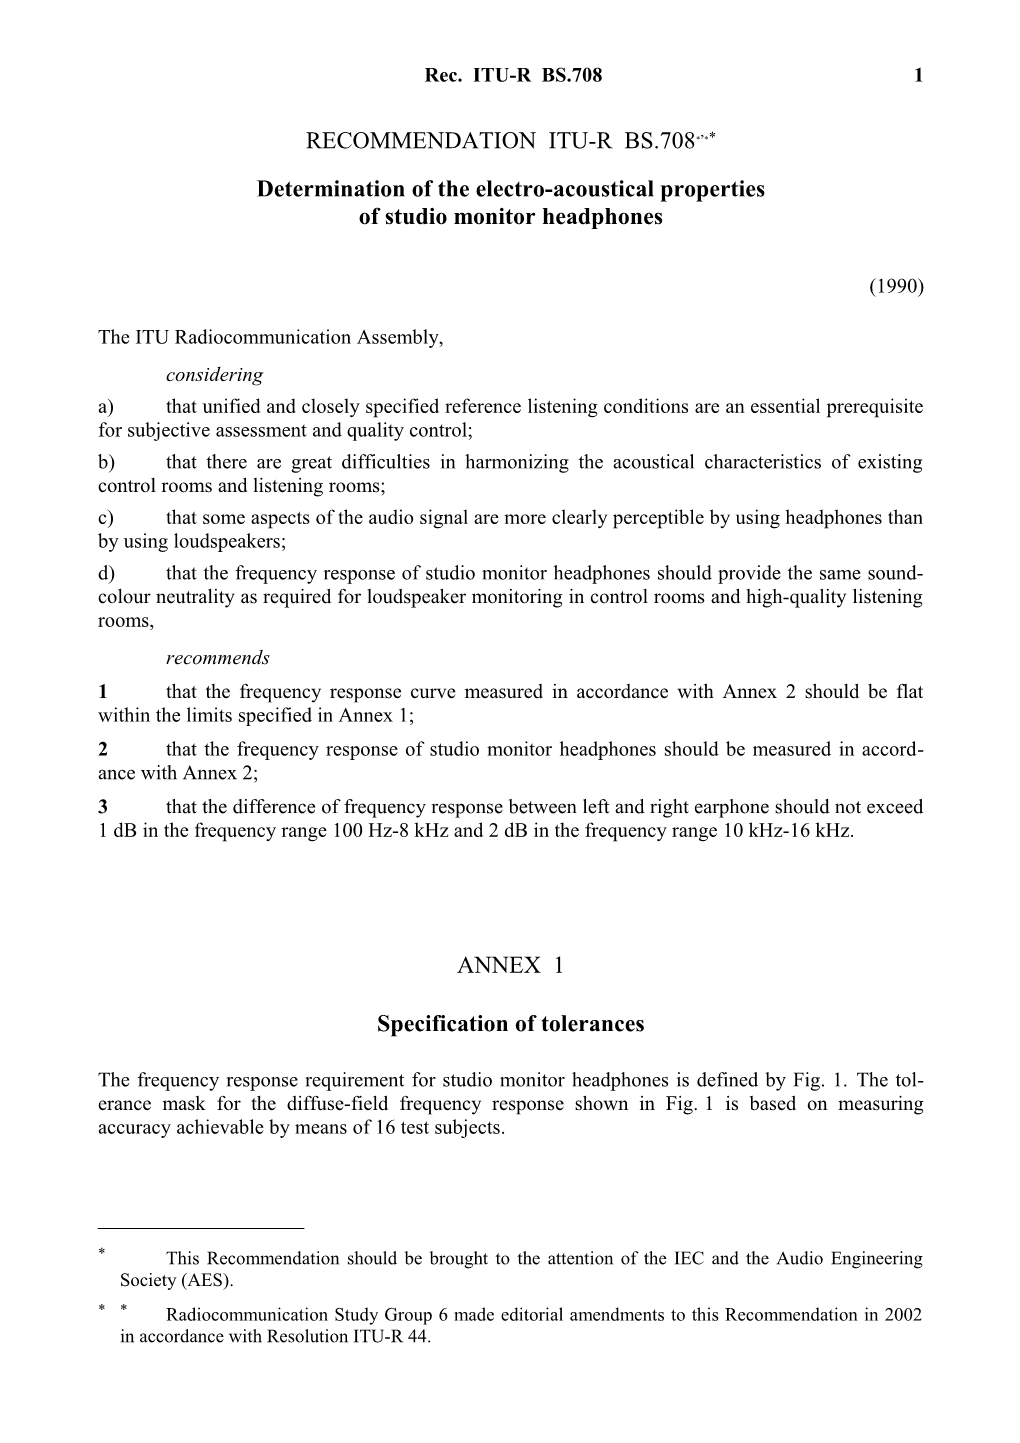 RECOMMENDATION ITU-R BS.708 - Determination of the Electro-Acoustical Properties of Studio